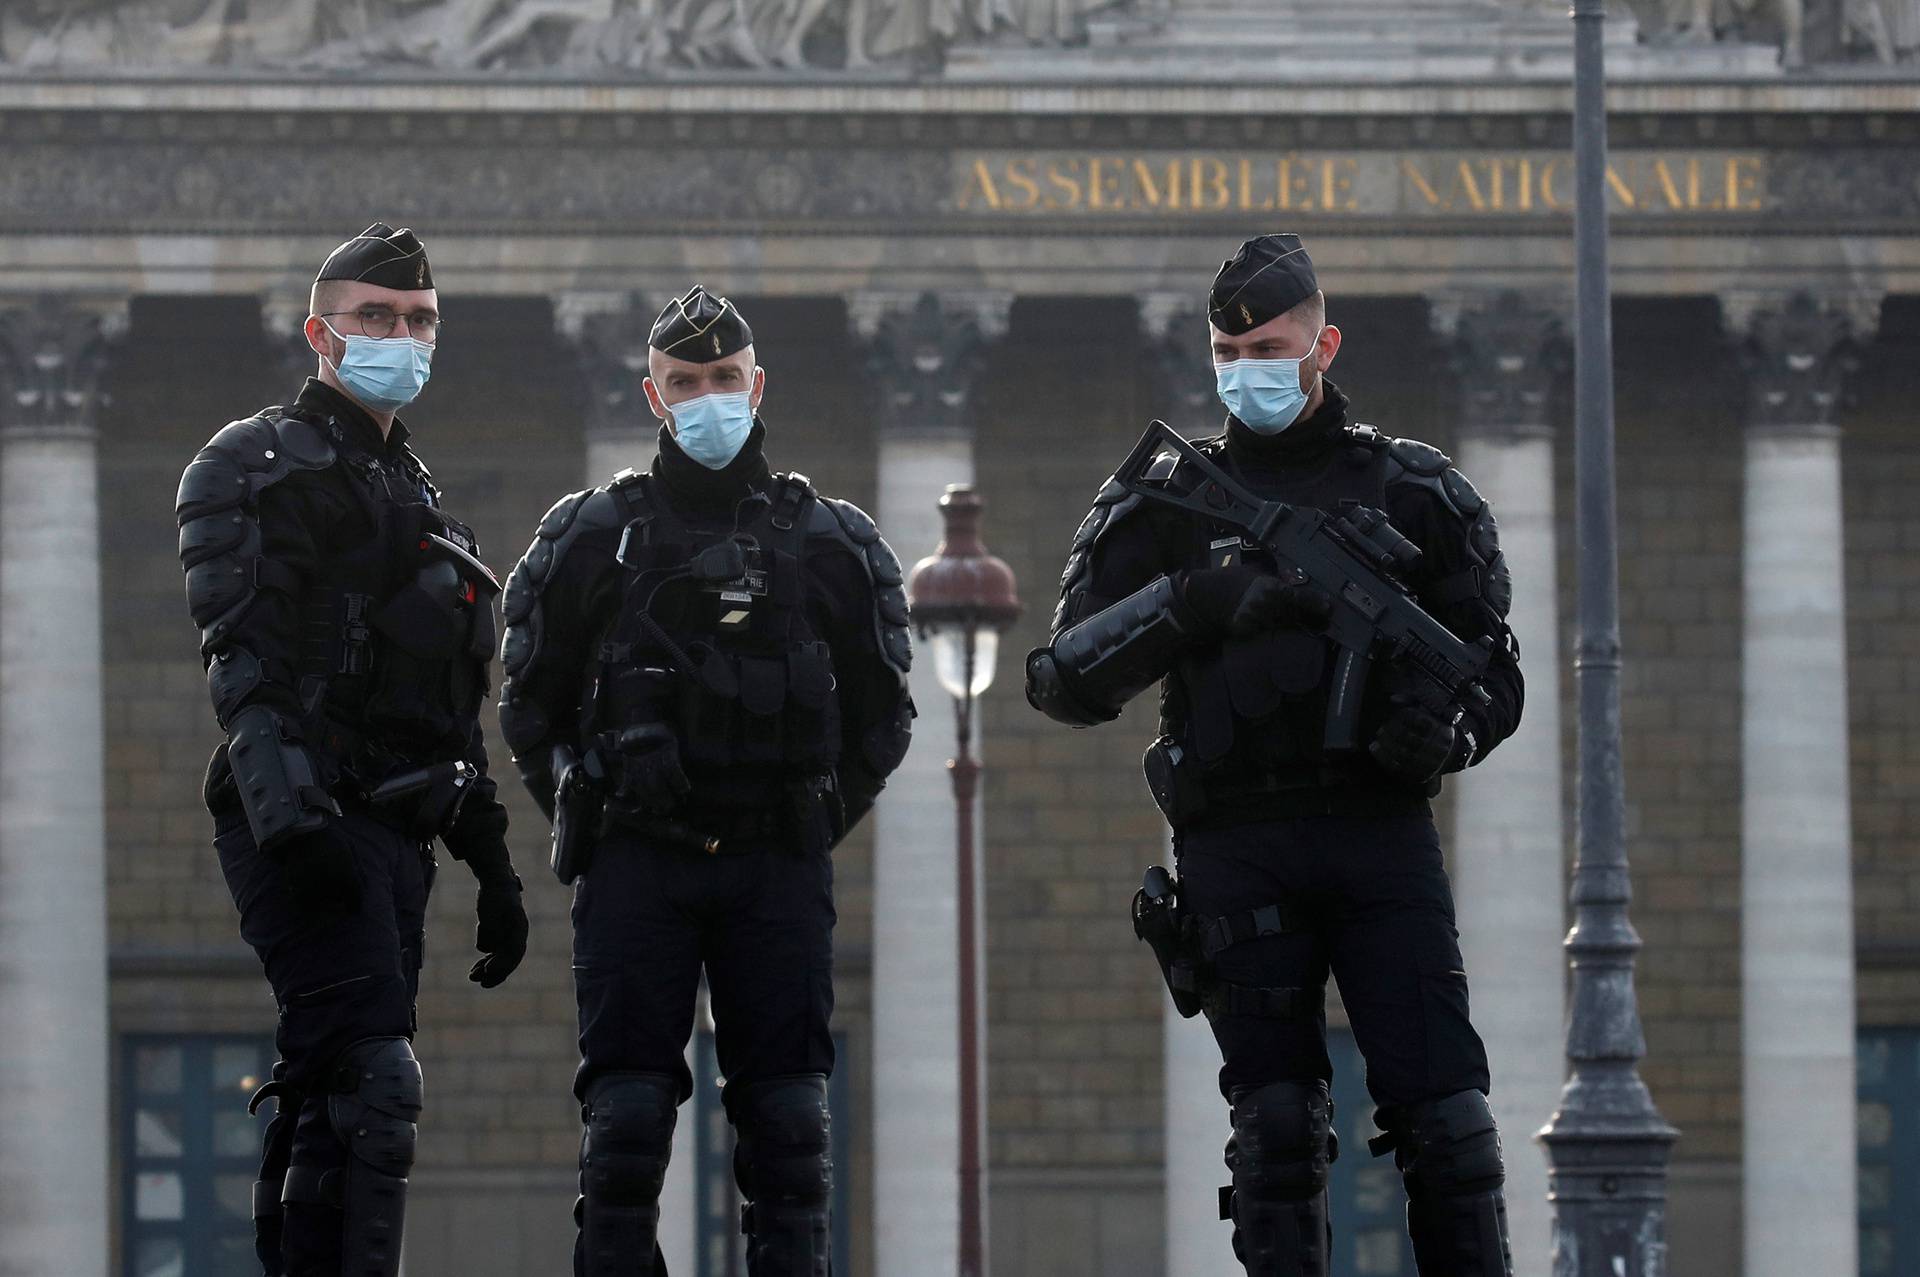 French gendarmes stand guard in front of the National Assembly in Paris